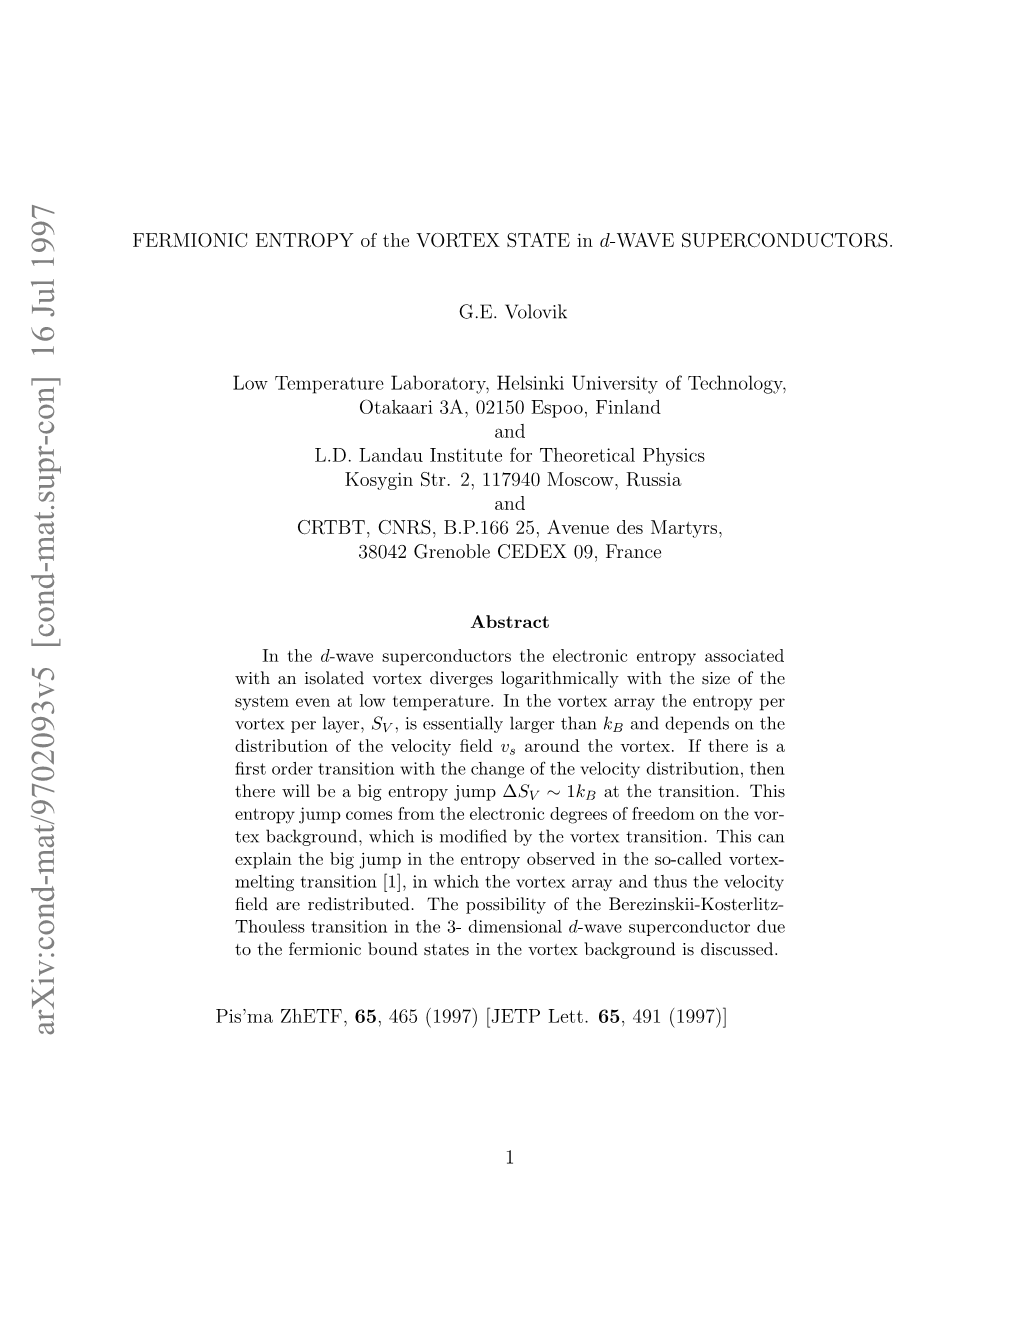 Fermionic Entropy of the Vortex State in D-Wave Superconductors